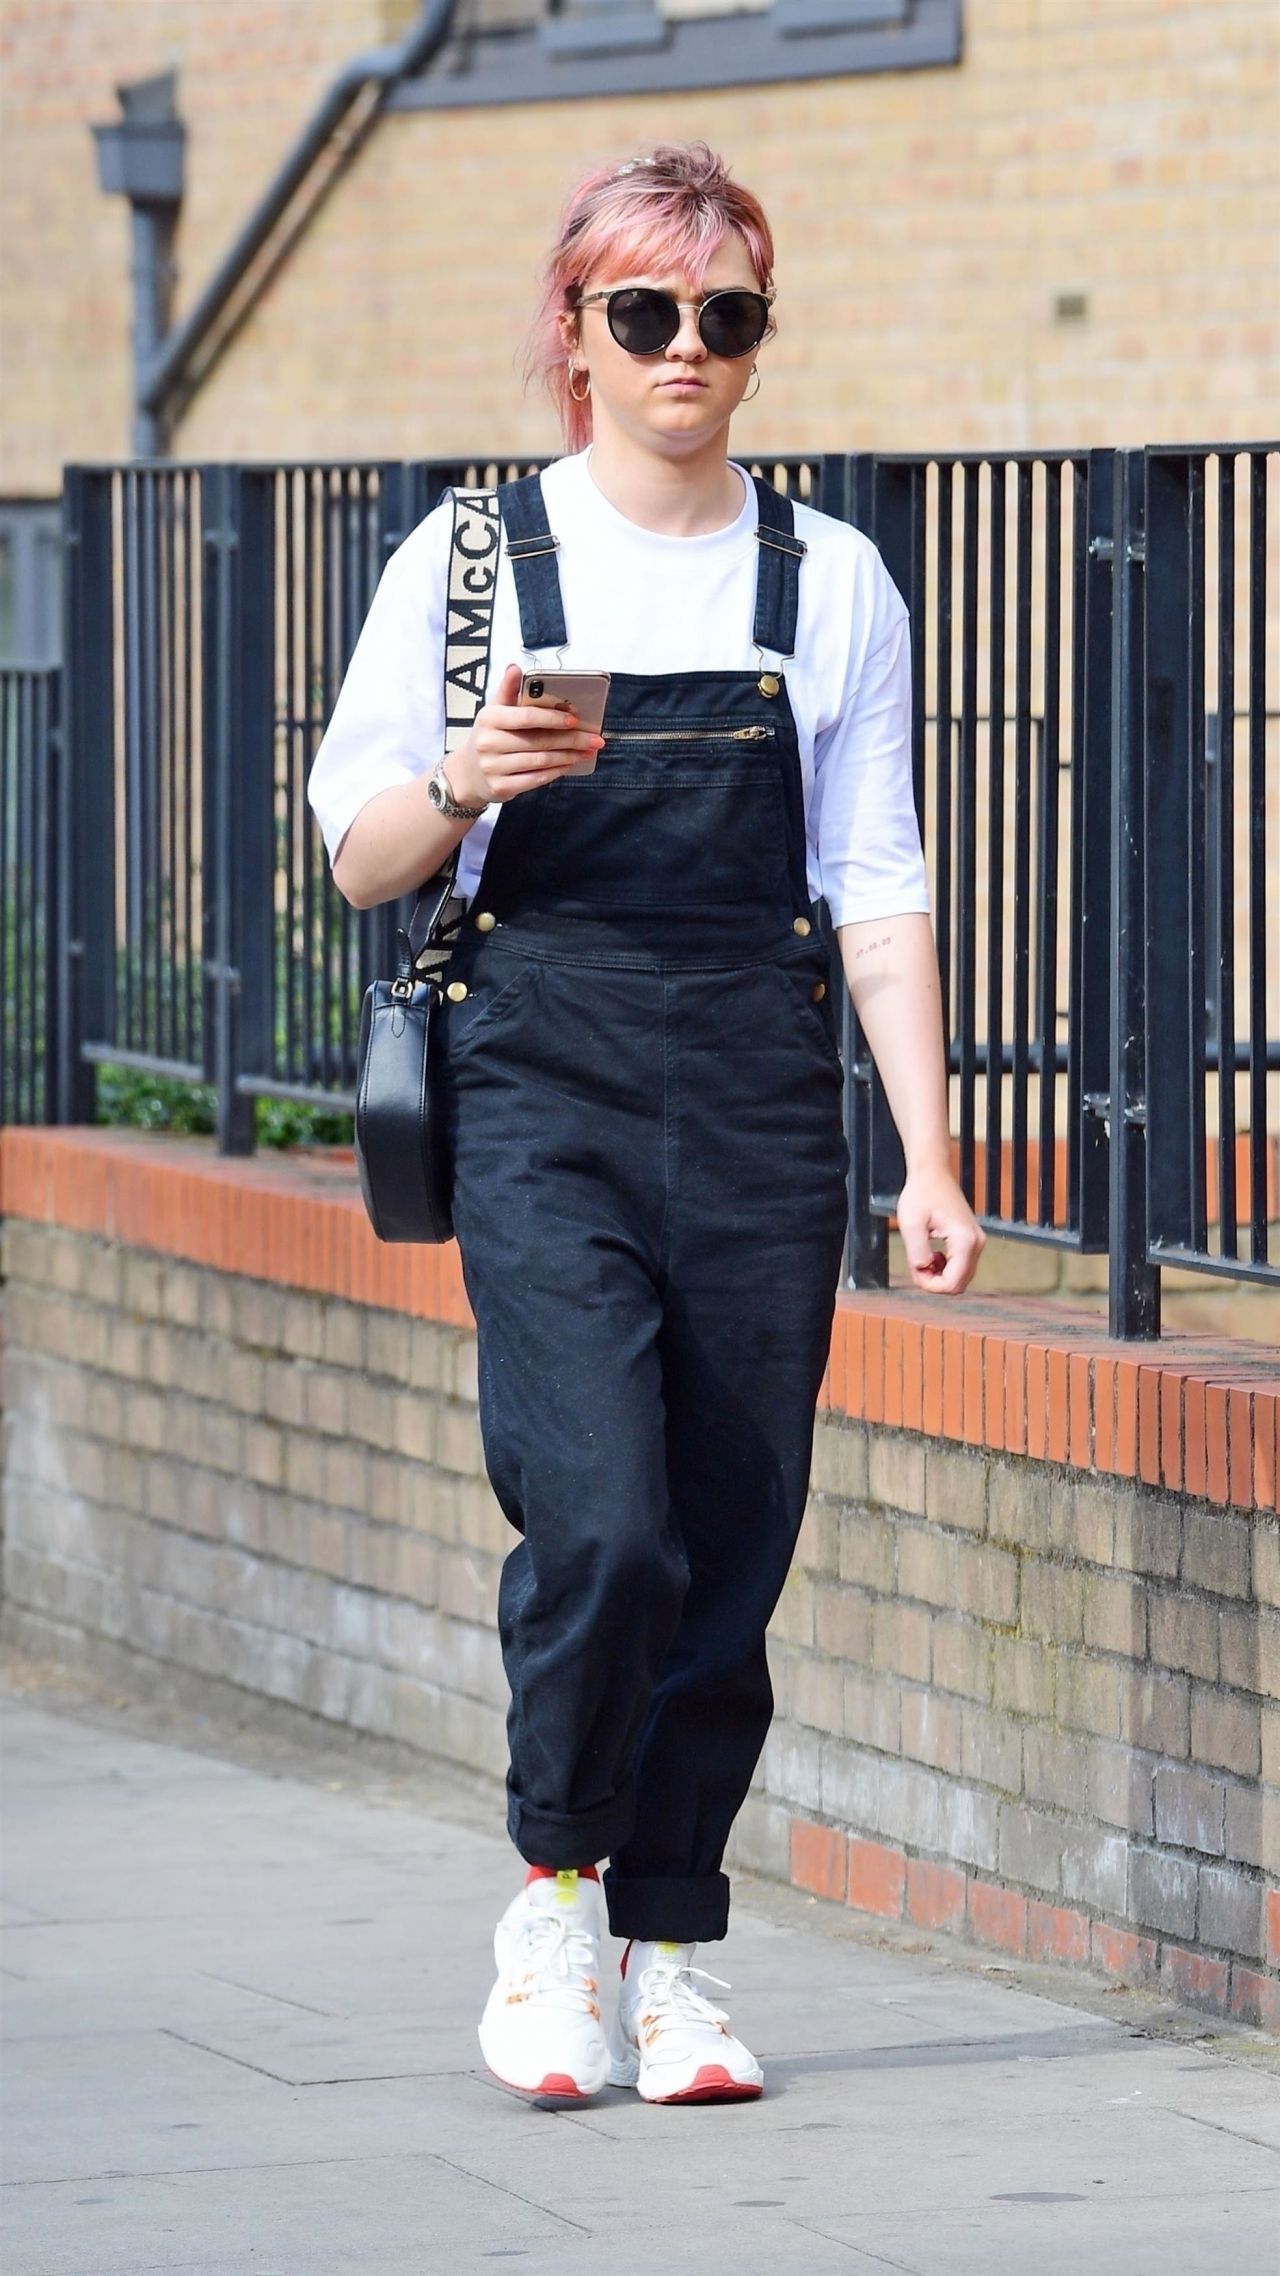 maisie-williams-out-in-london-07-17-2019-3.jpg